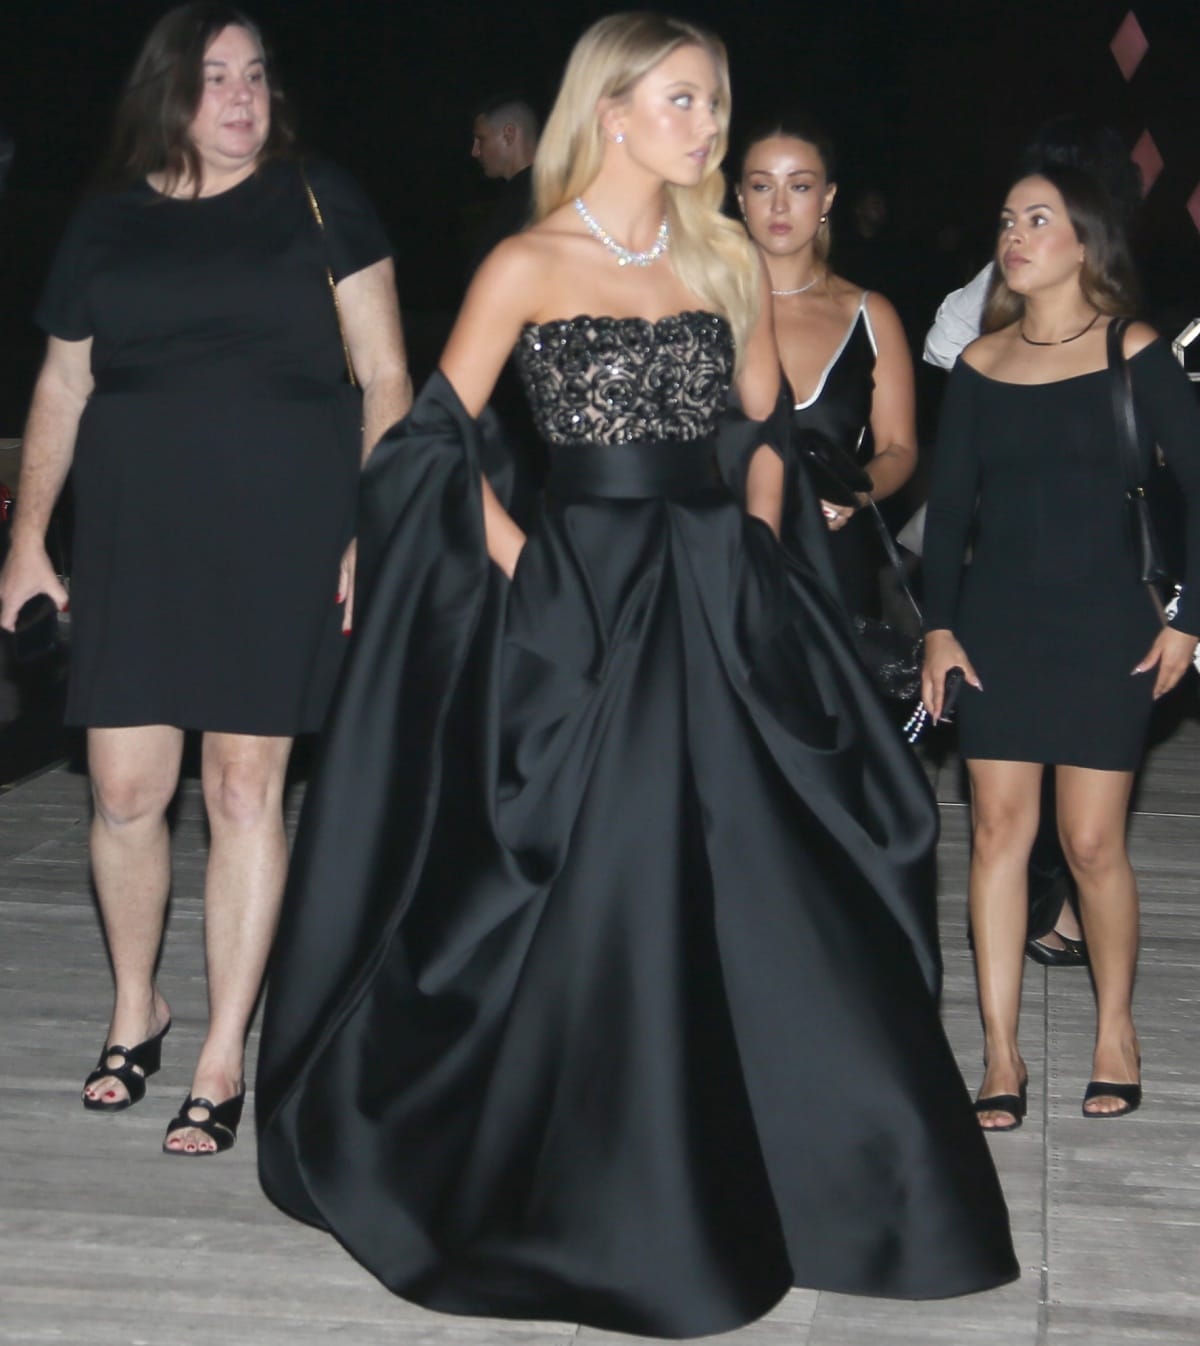 Sydney Sweeney looking stunning in a custom black gown from Armani Privé at Giorgio Armani’s “One Night Only” fashion show